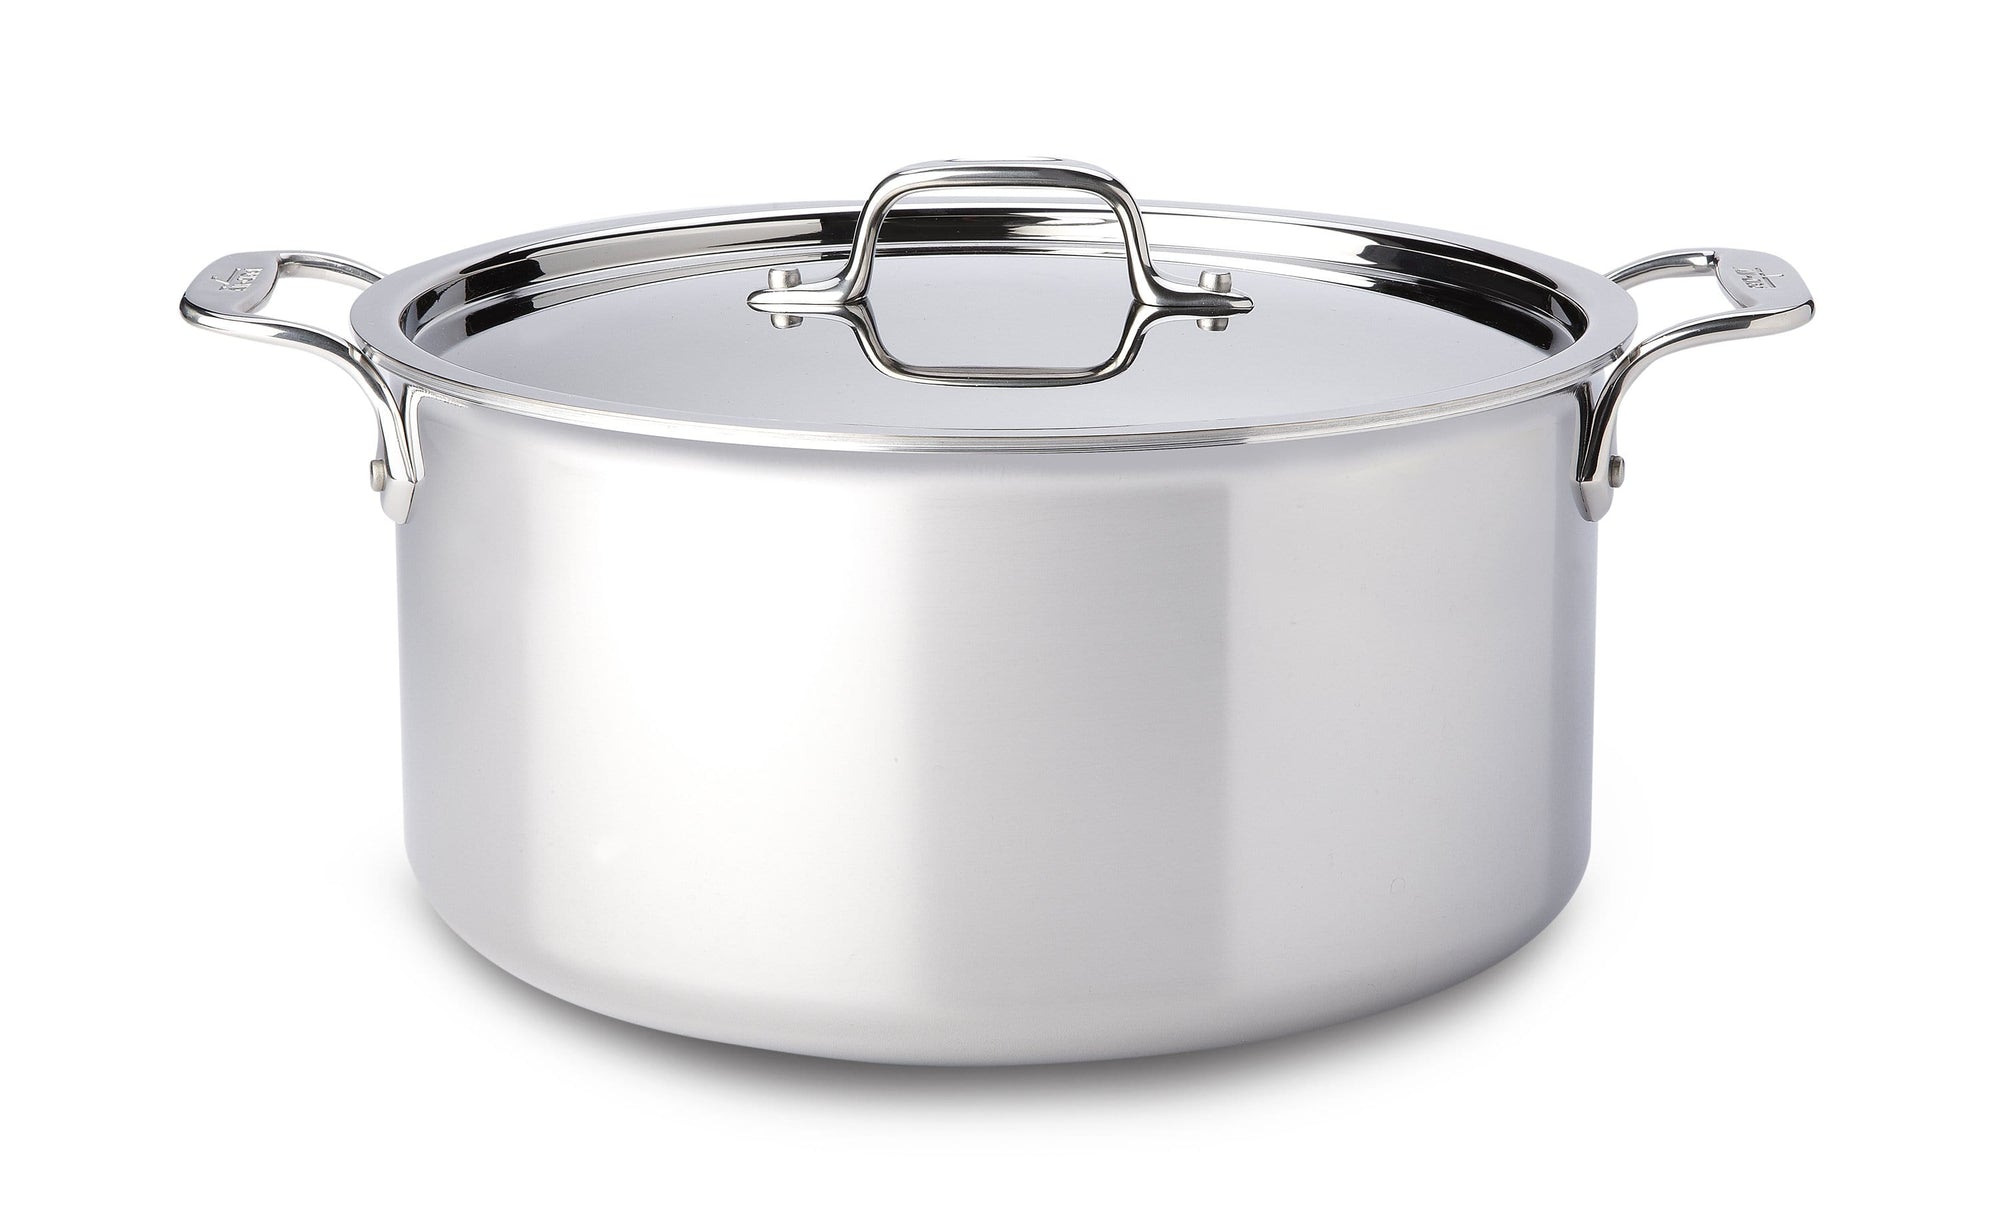 https://cdn.shopify.com/s/files/1/0474/2338/9856/products/all-clad-all-clad-stainless-steel-8-qt-stock-pot-011644502522-19591952597152_2000x.jpg?v=1604172931